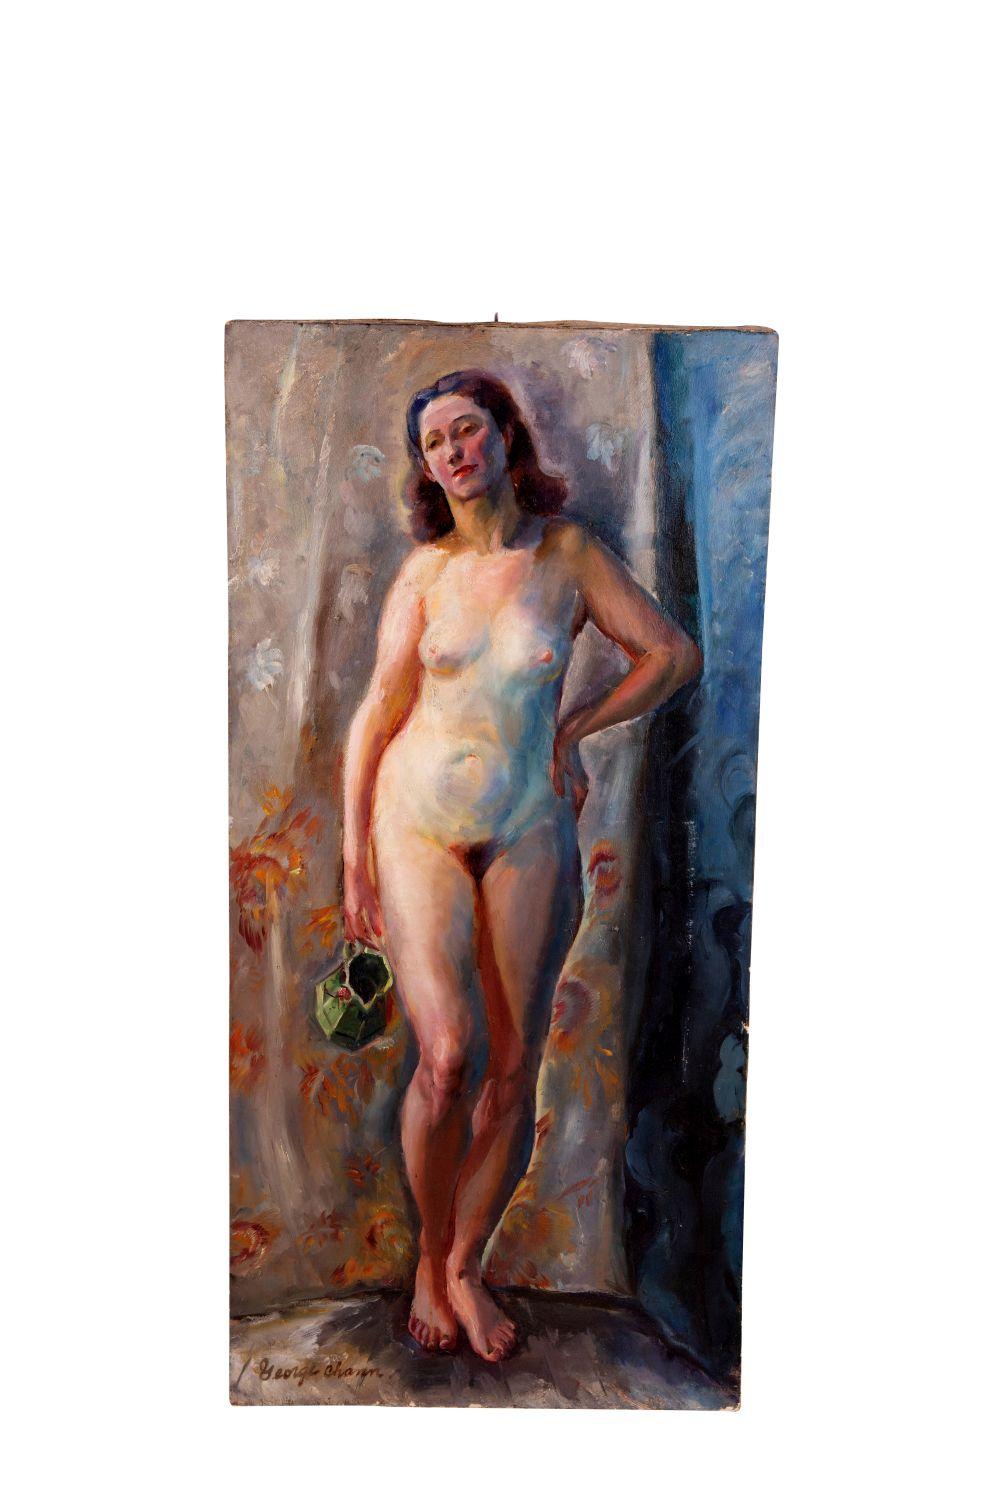 GEORGE CHAN NUDE WOMAN oil on 335ad8